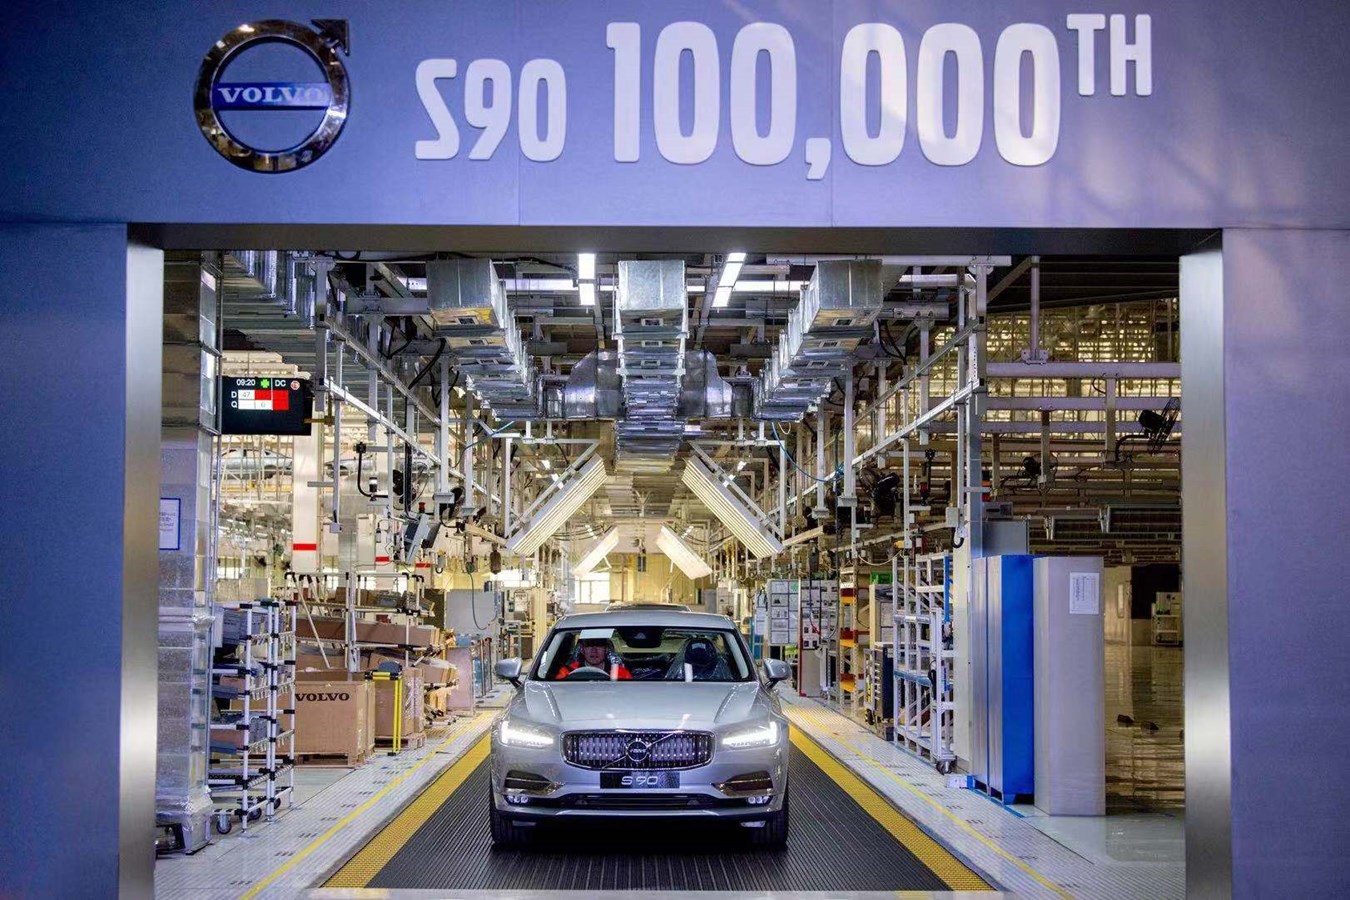 The 100,000th S90 rolls of production line in Volvo Cars Daqing plant in China